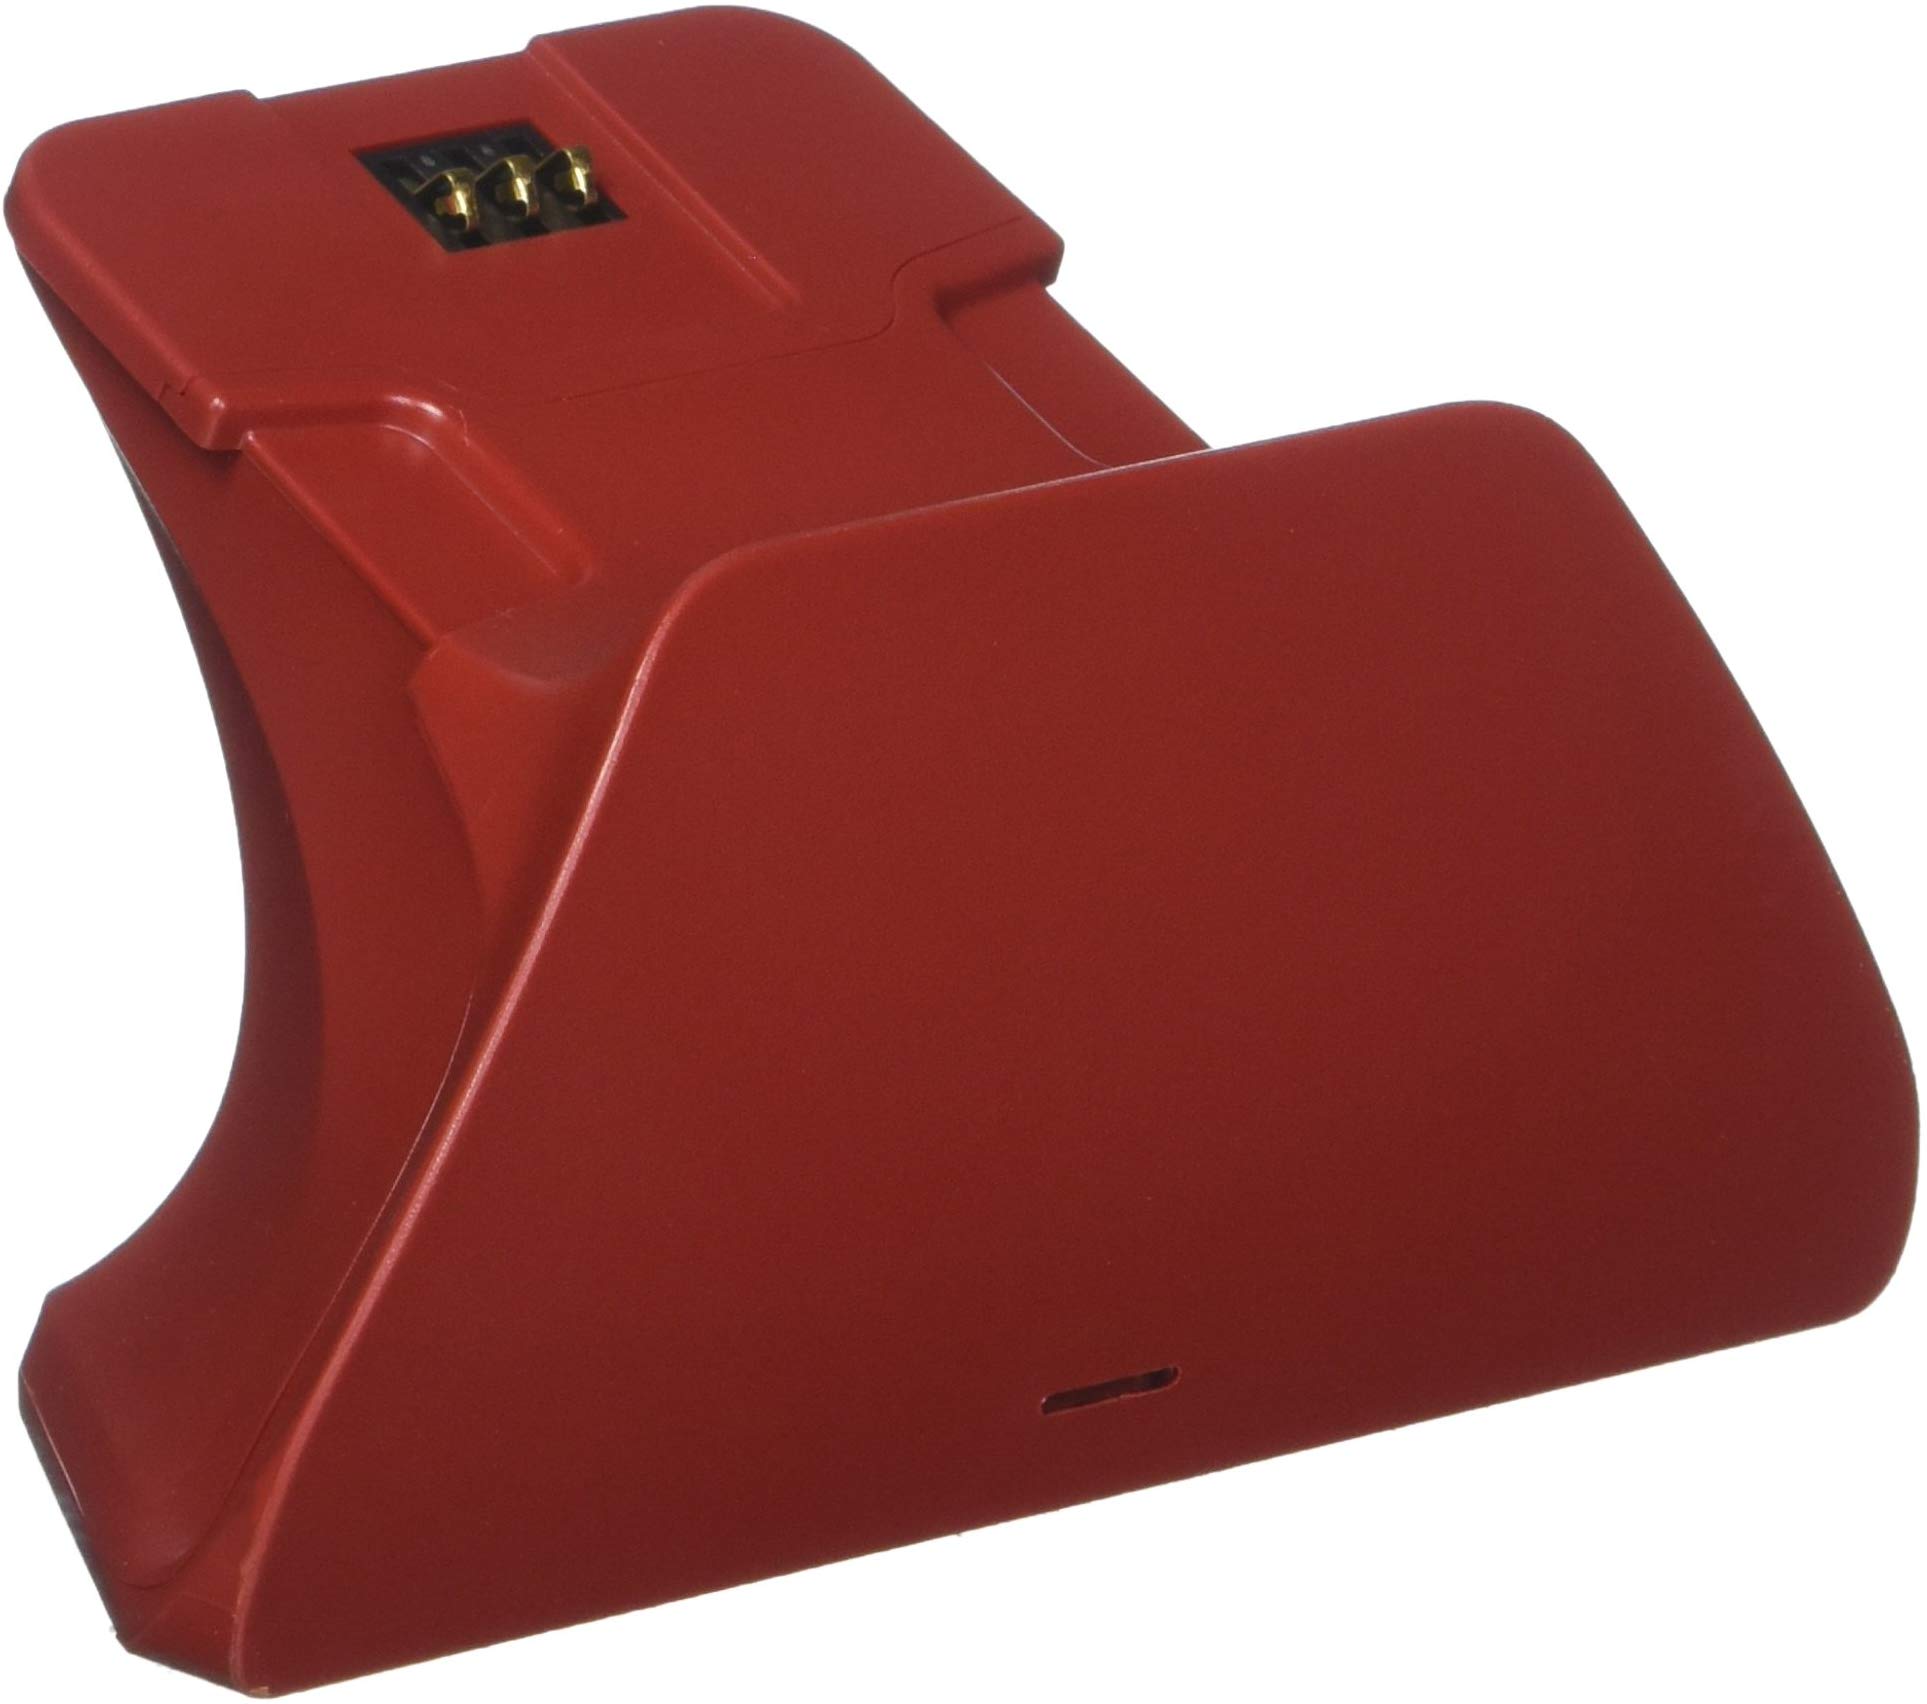 Controller Gear Xbox Pro Charging Stand Oxide Red. Exact Match to Your Xbox One/ S Controller. Officially Licensed and Designed for Xbox - Xbox One